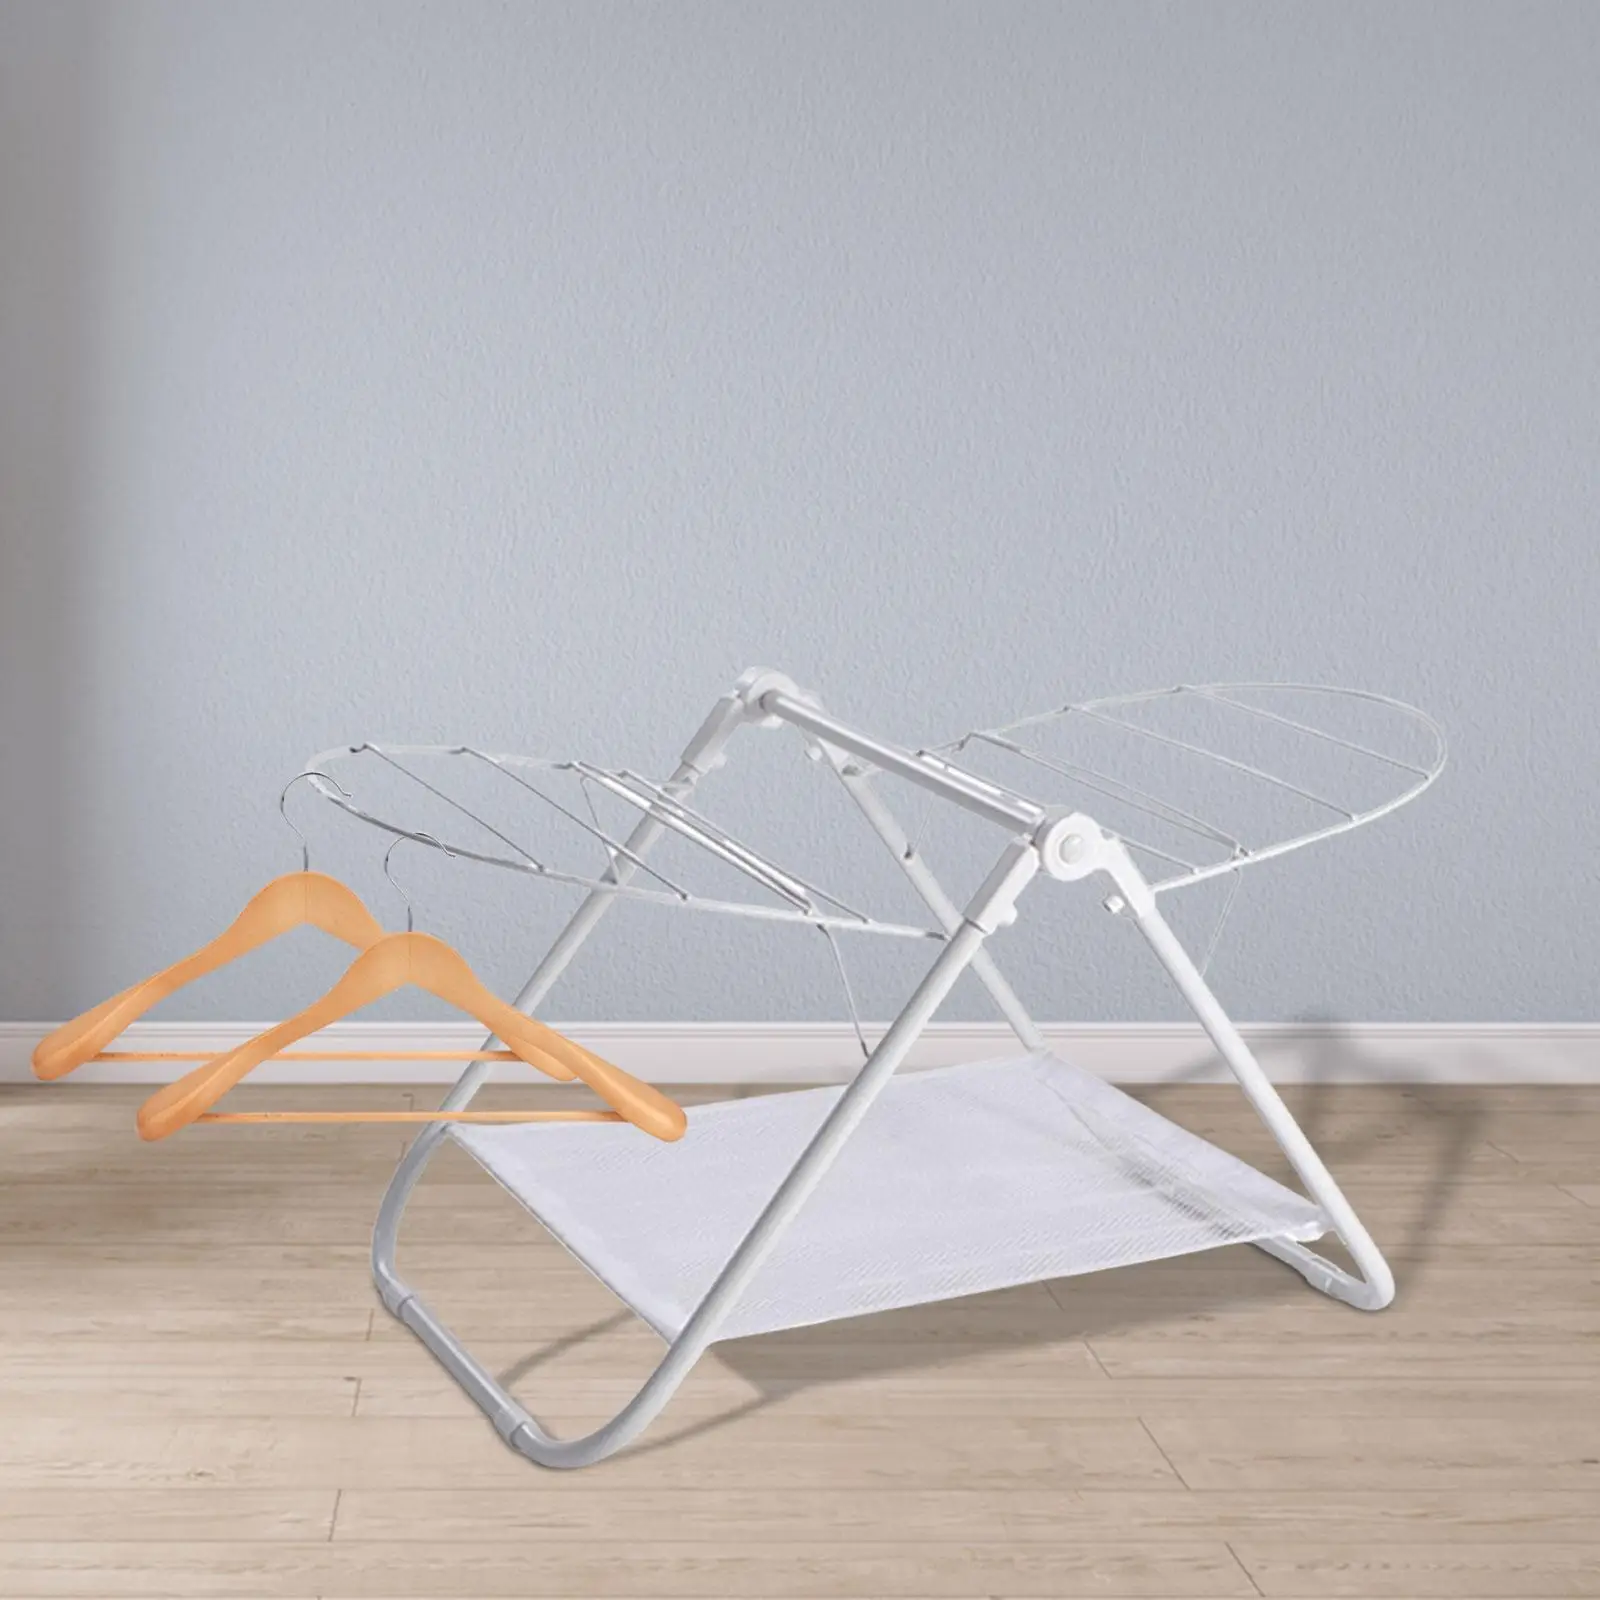 Foldable Laundry Rack Floor Type Large Strong Bearing Capacity Laundry Garment Dryer Stand Mobile Clothes Airer for Home Clothes